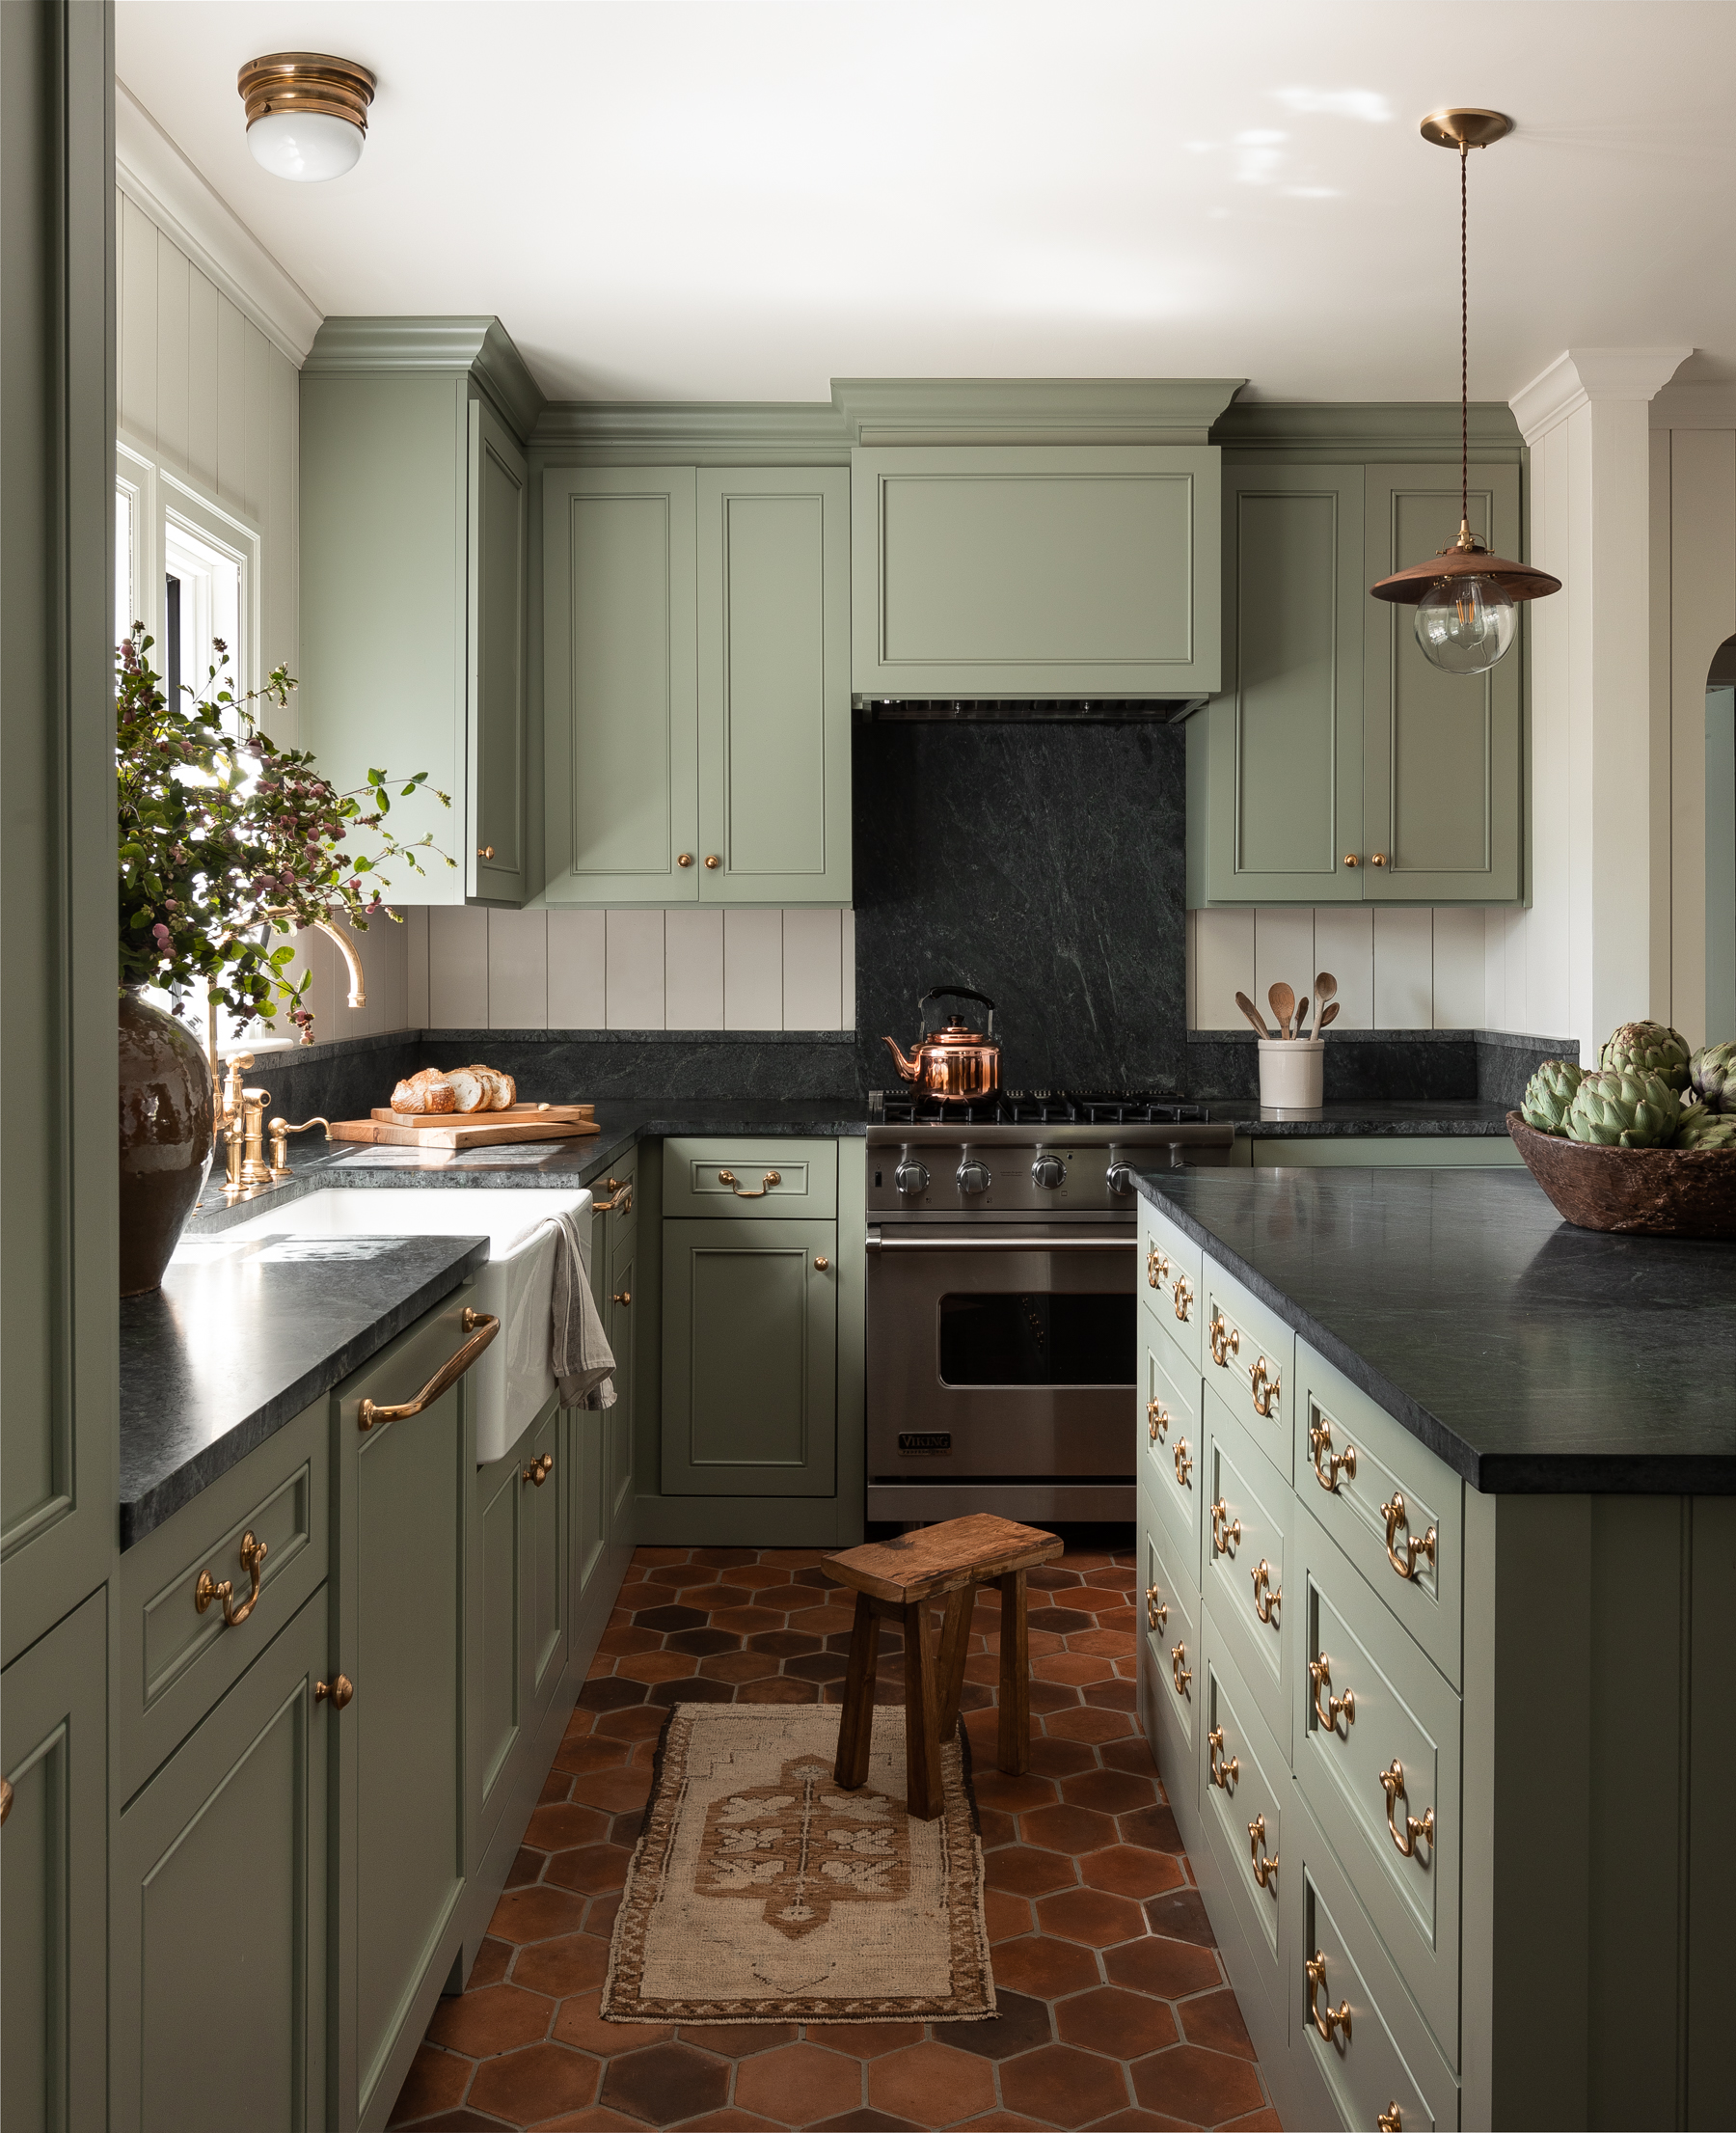 Heidi Caillier image of green kitchen cabinetry